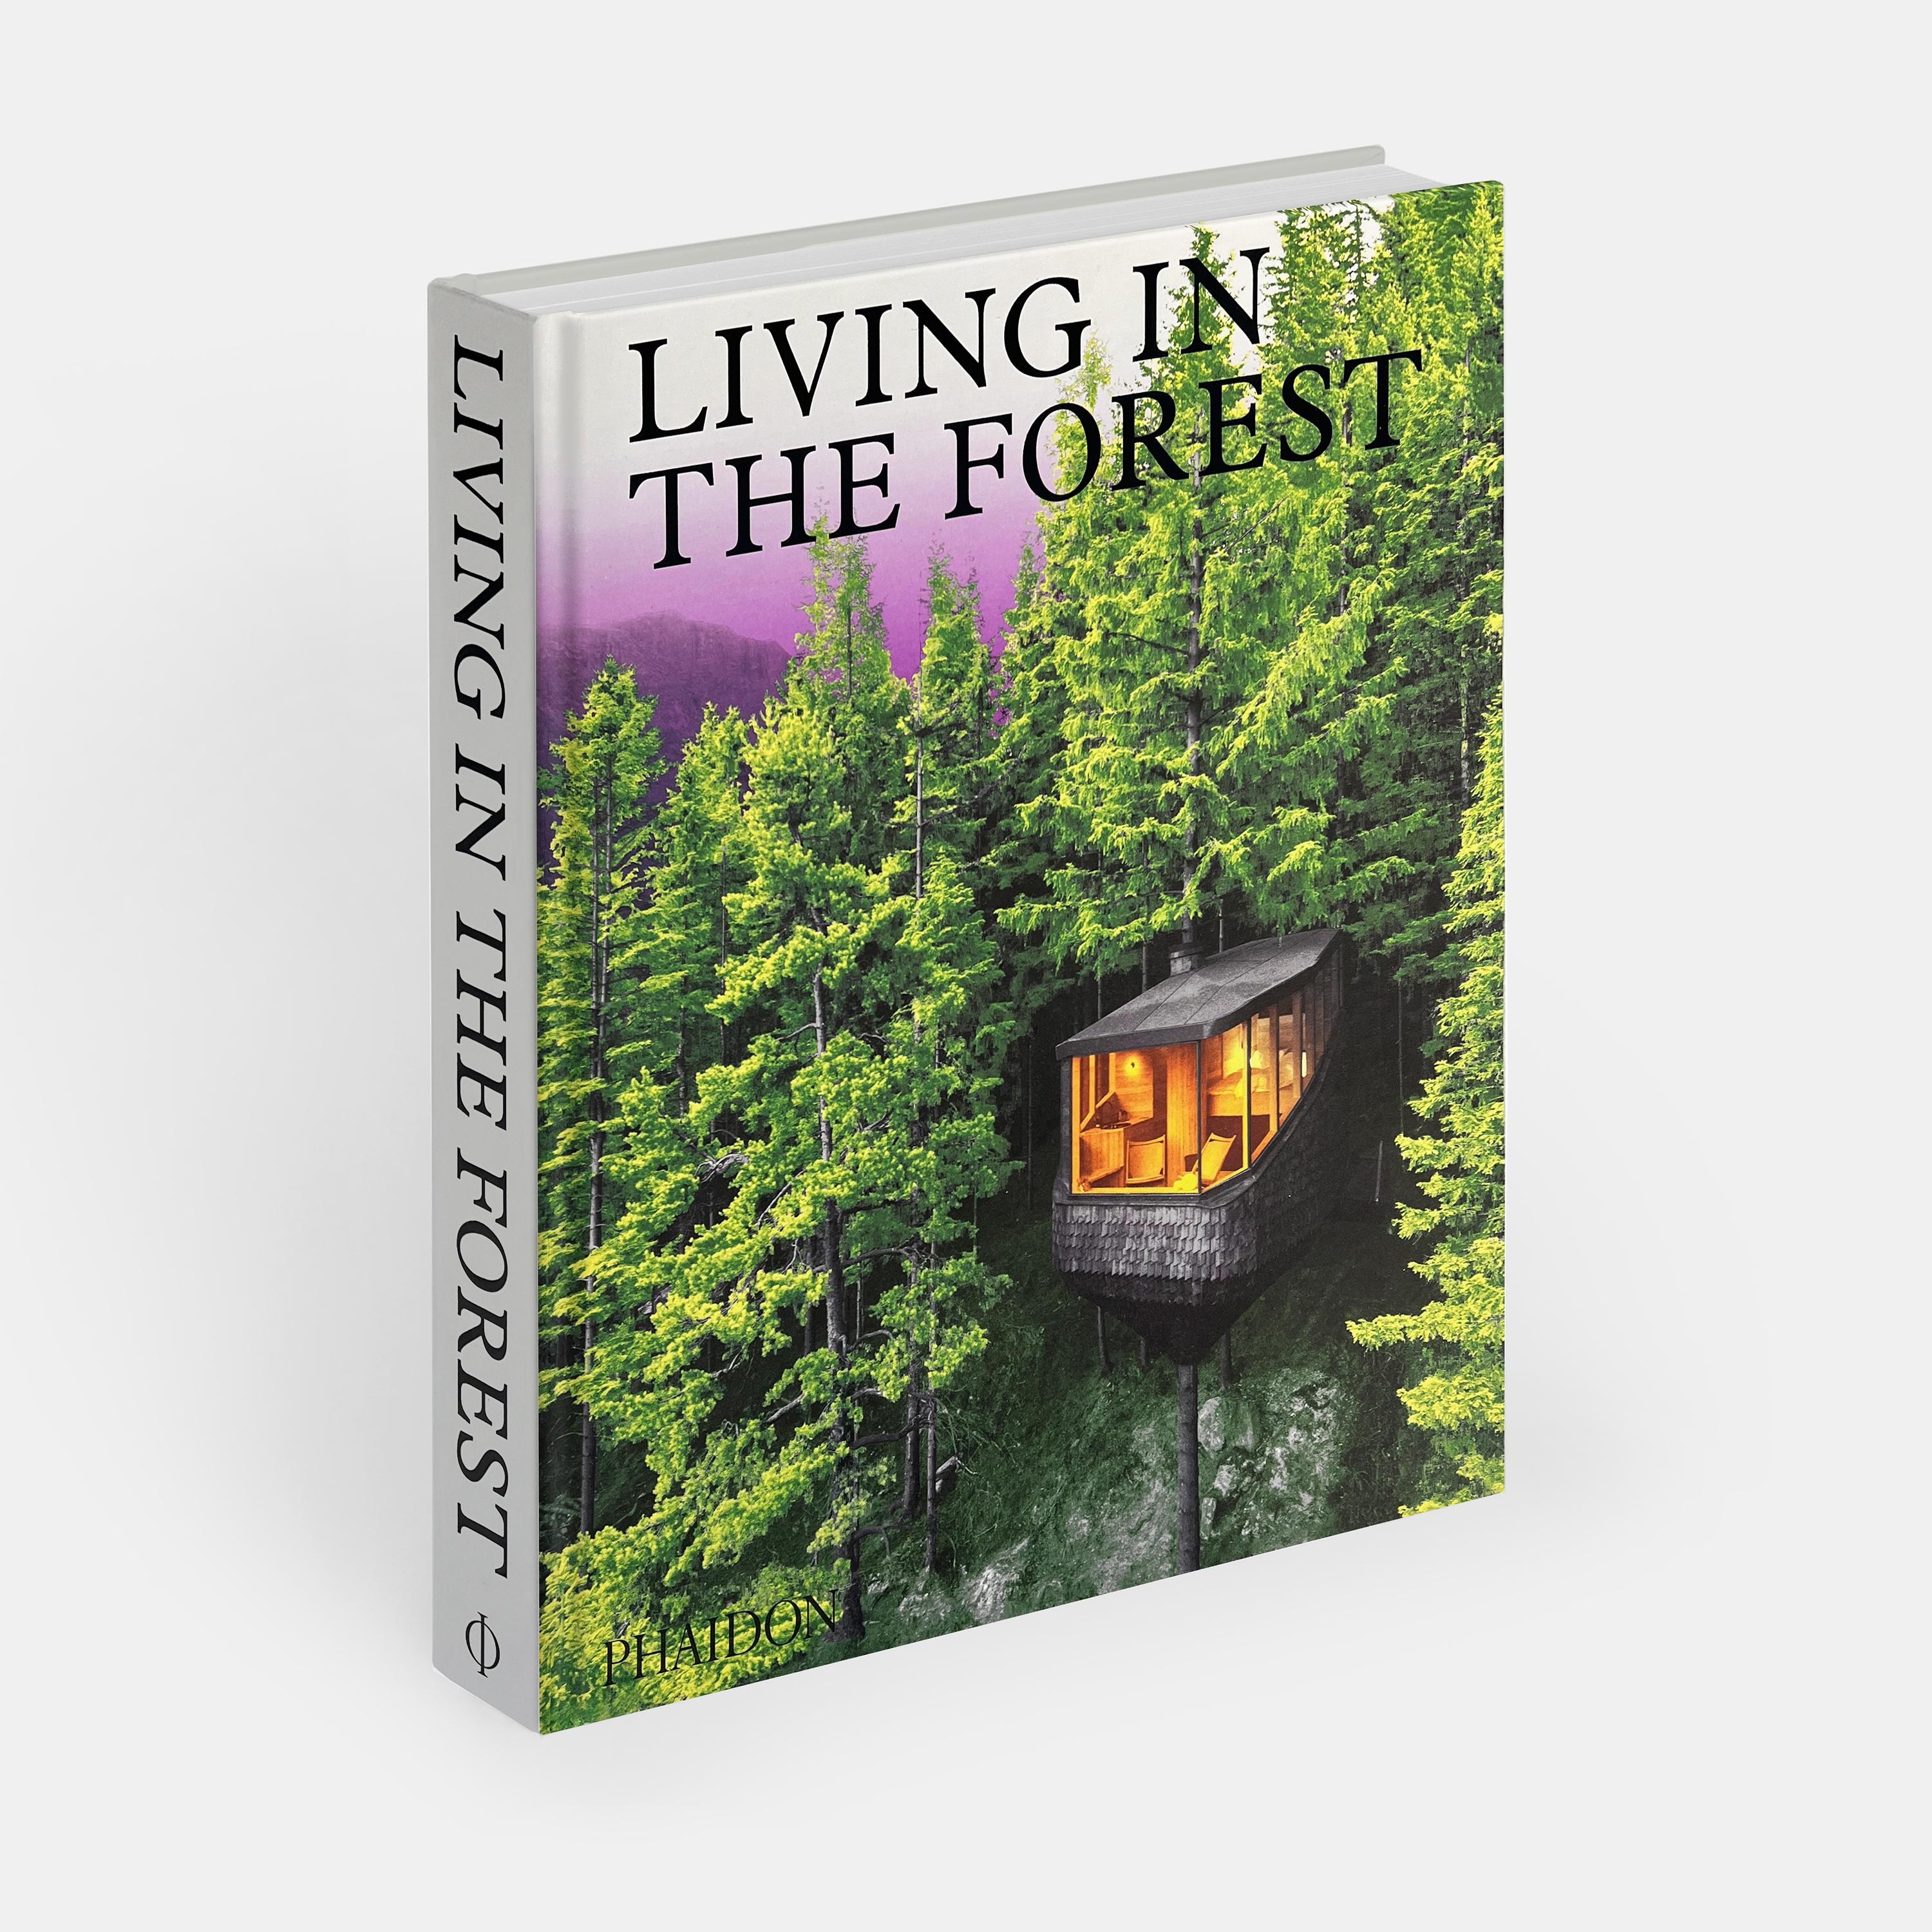 A spectacular collection of 50 magnificent contemporary houses across the globe, each built to exist harmoniously amid the trees.

Take a walk through luscious jungles, get lost among snowy evergreens, and look out from mossy banks across vast